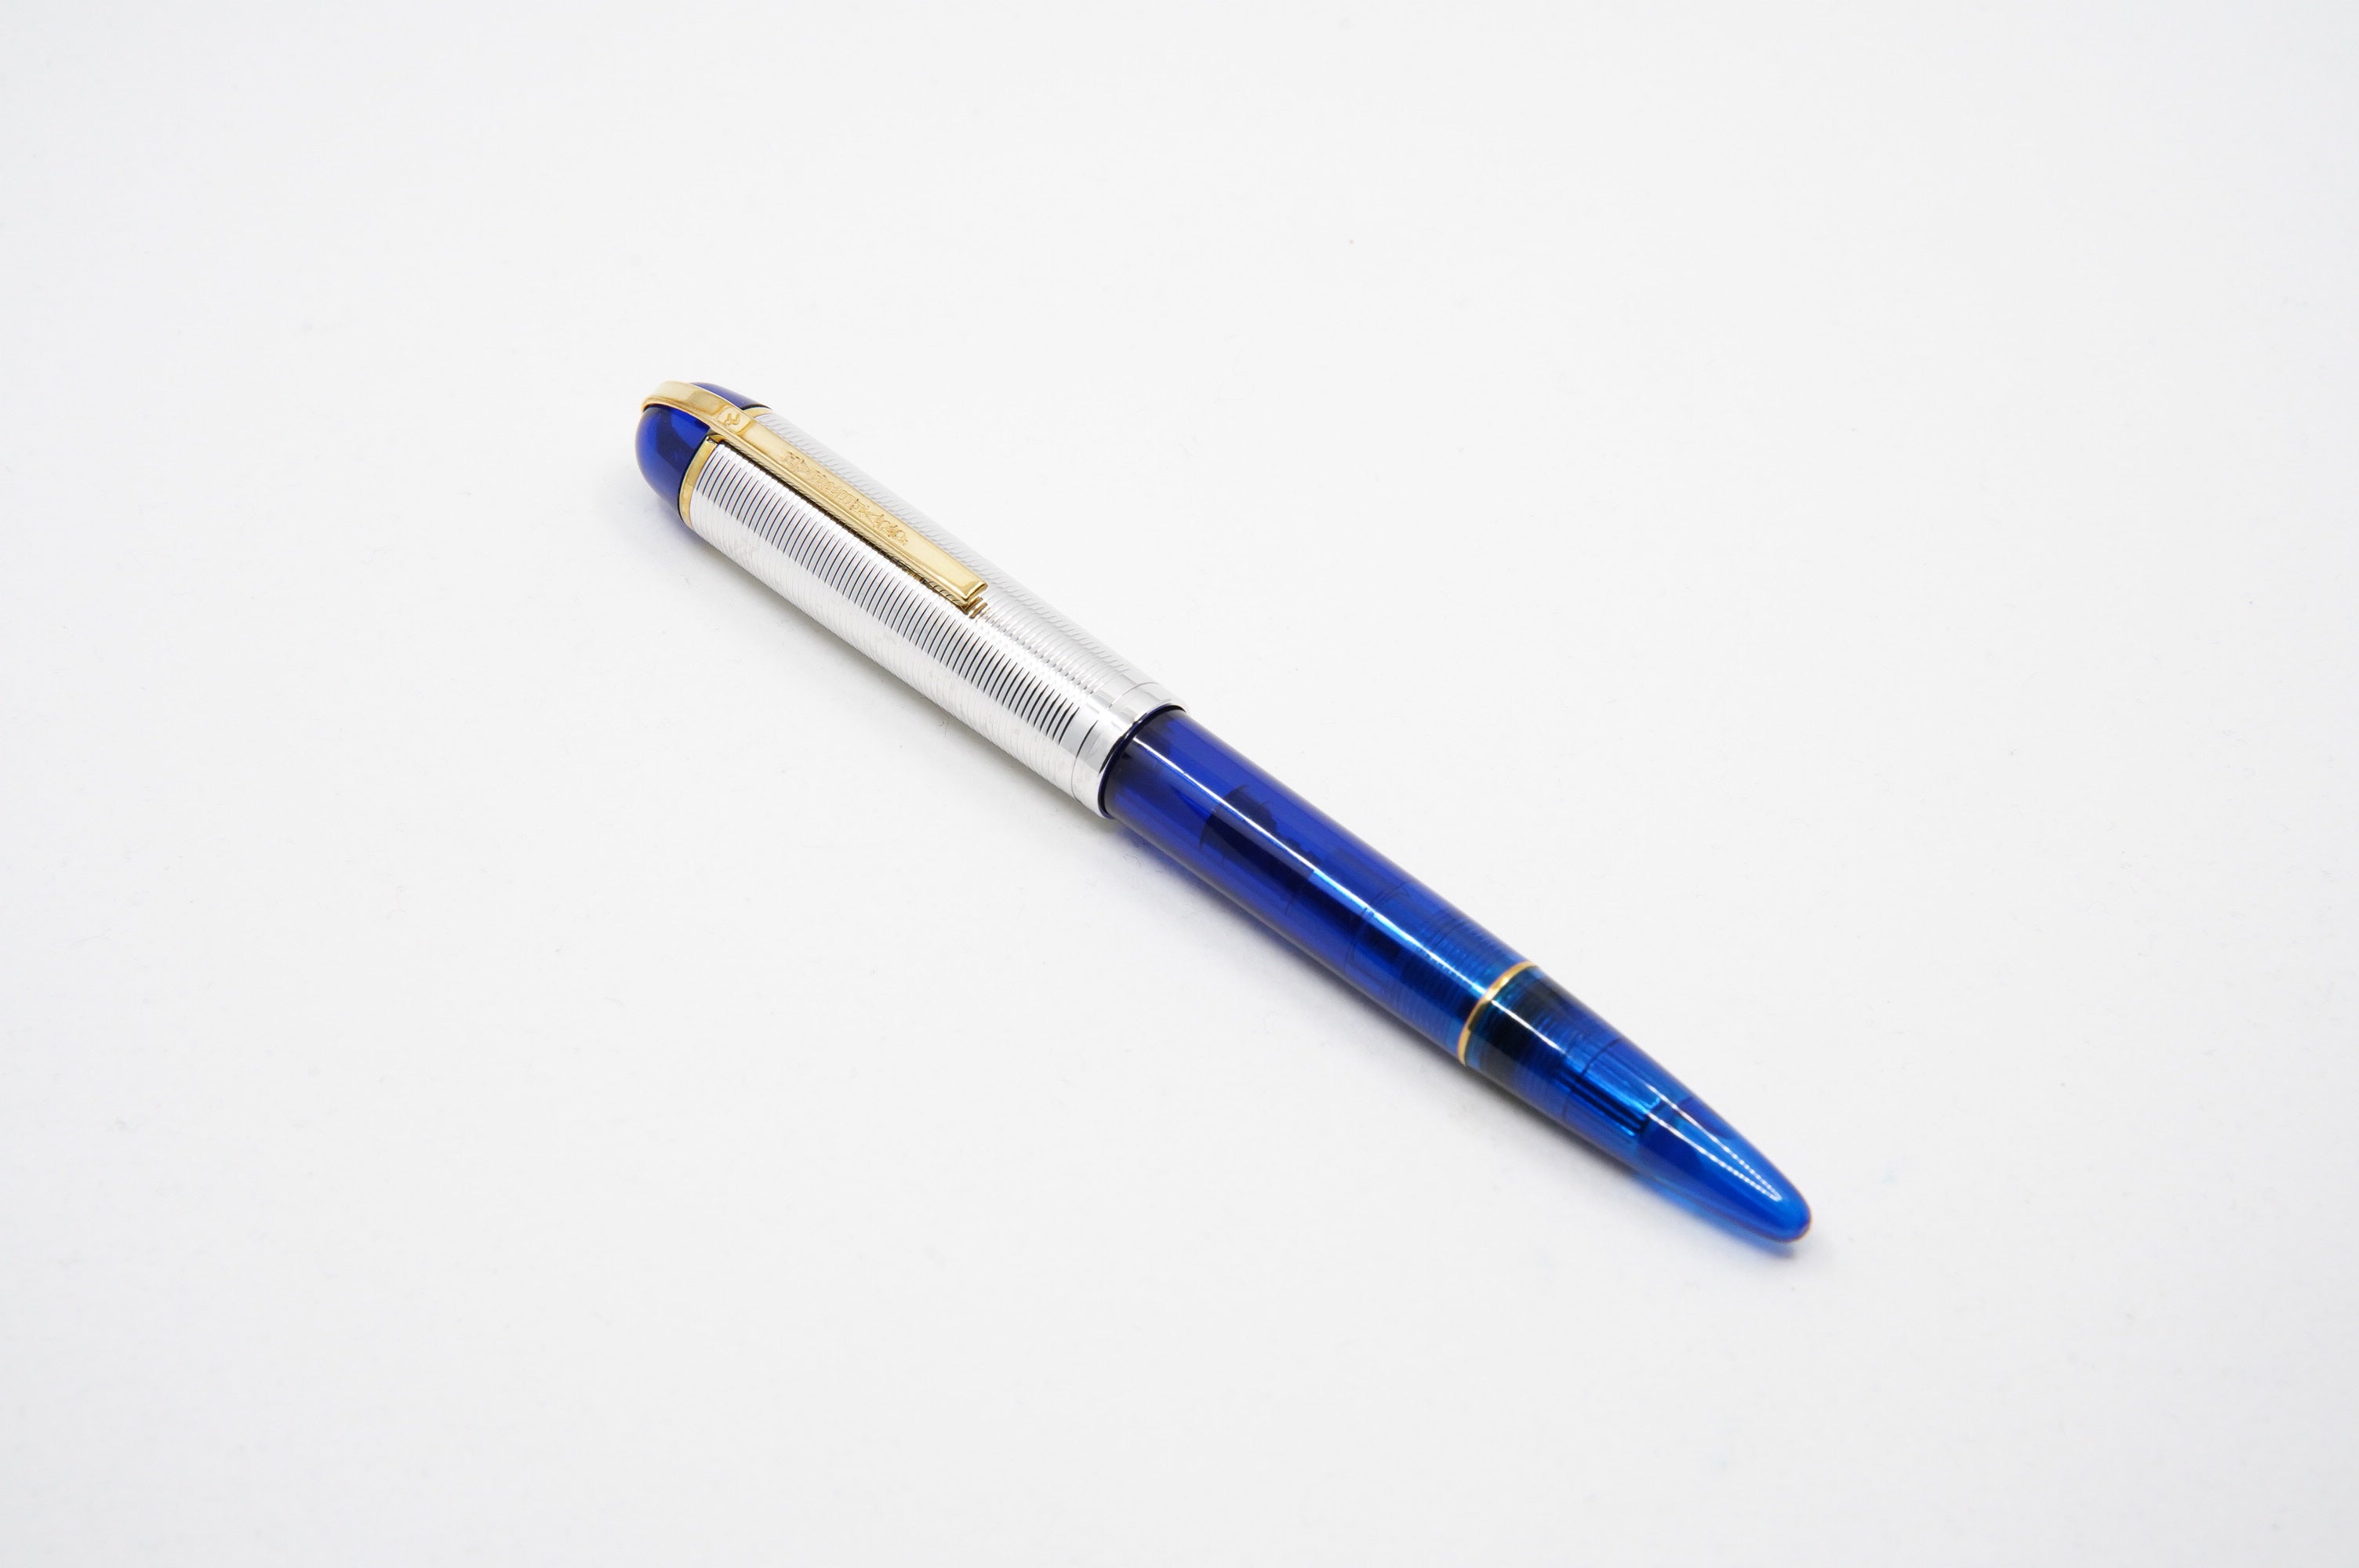 Wahl Eversharp Skyline FP Blue Demo - The iconic SKYLINE created by Henry Dreyfus in 1939